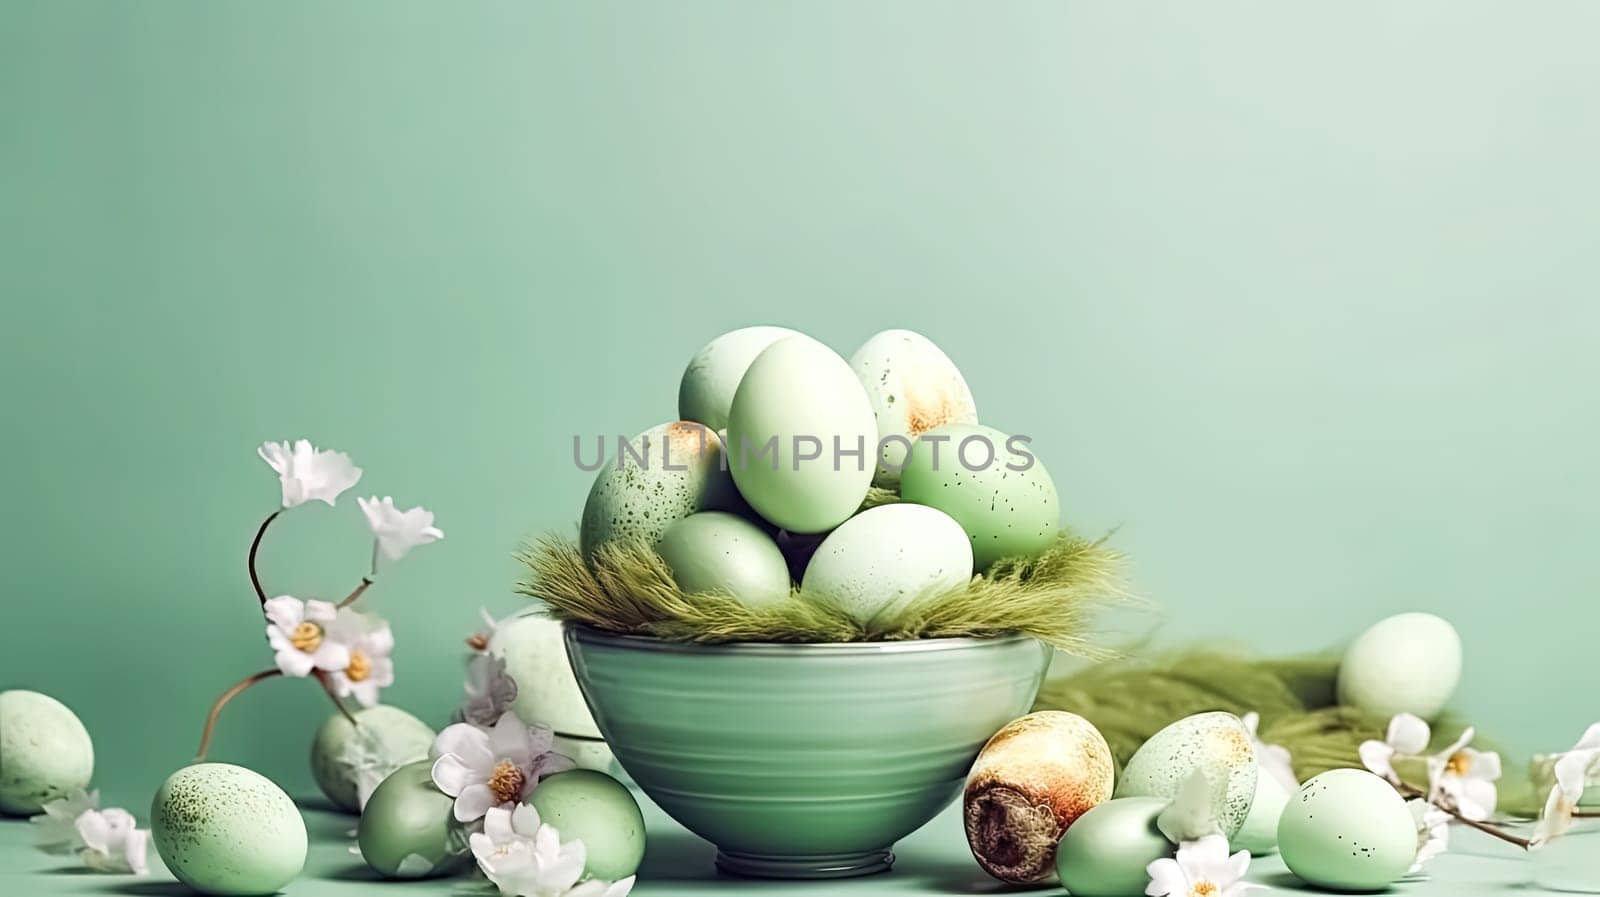 Springtime delight, Basket filled with Easter eggs a cheerful illustration radiating the joy of celebration during this vibrant spring holiday